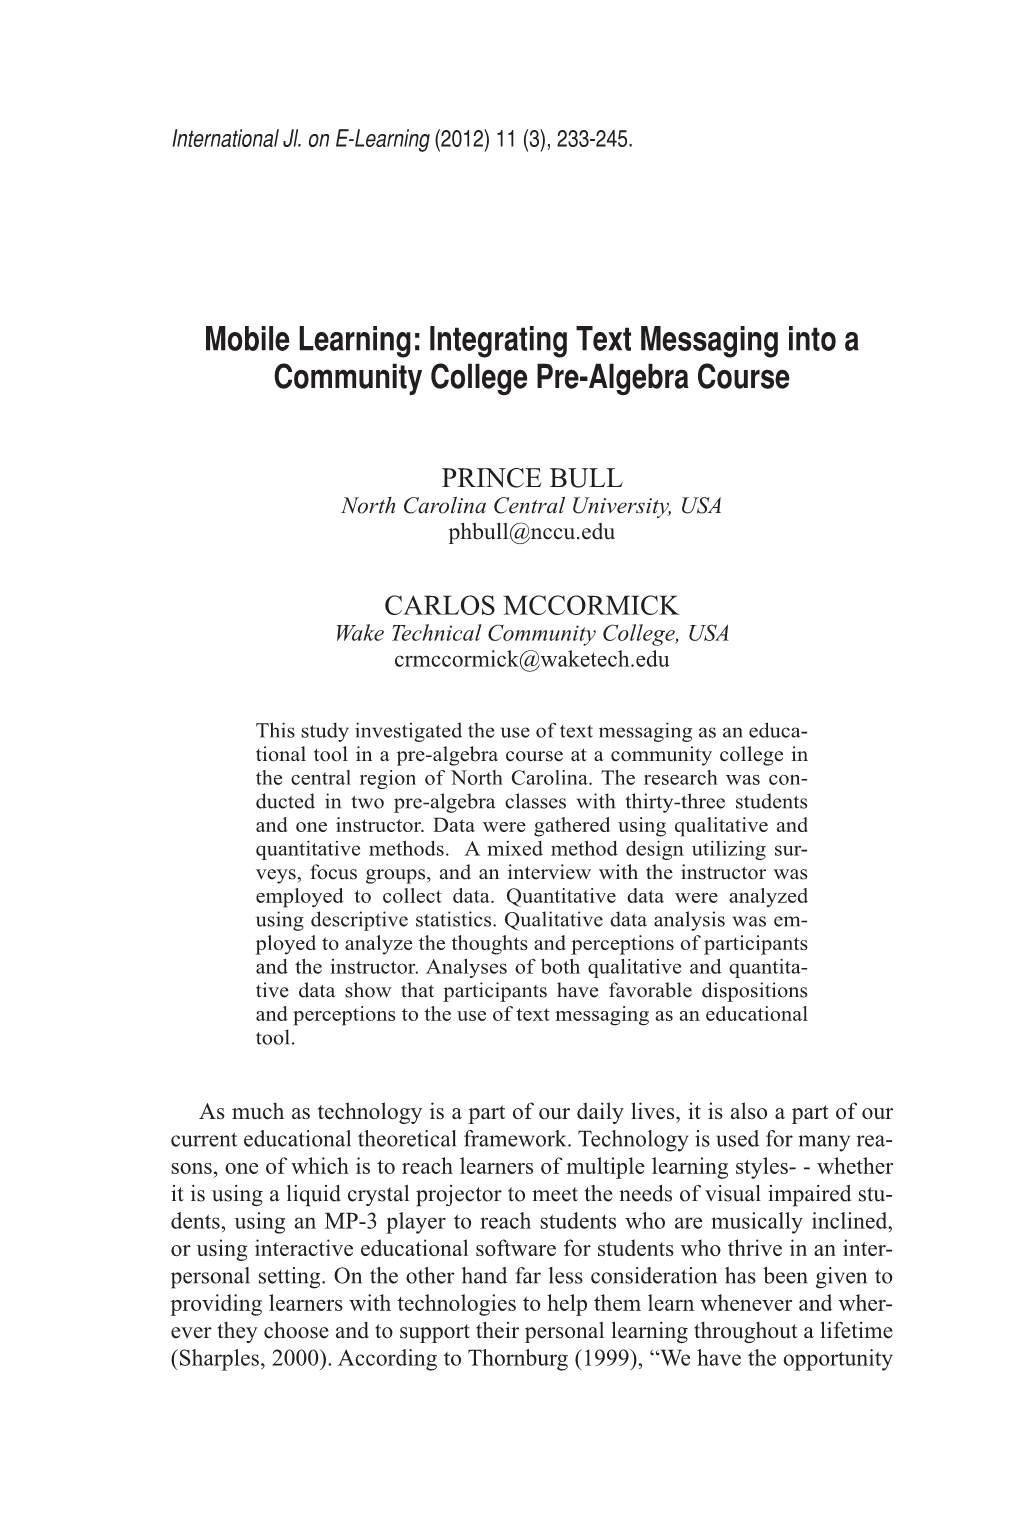 Integrating Text Messaging Into a Community College Pre-Algebra Course